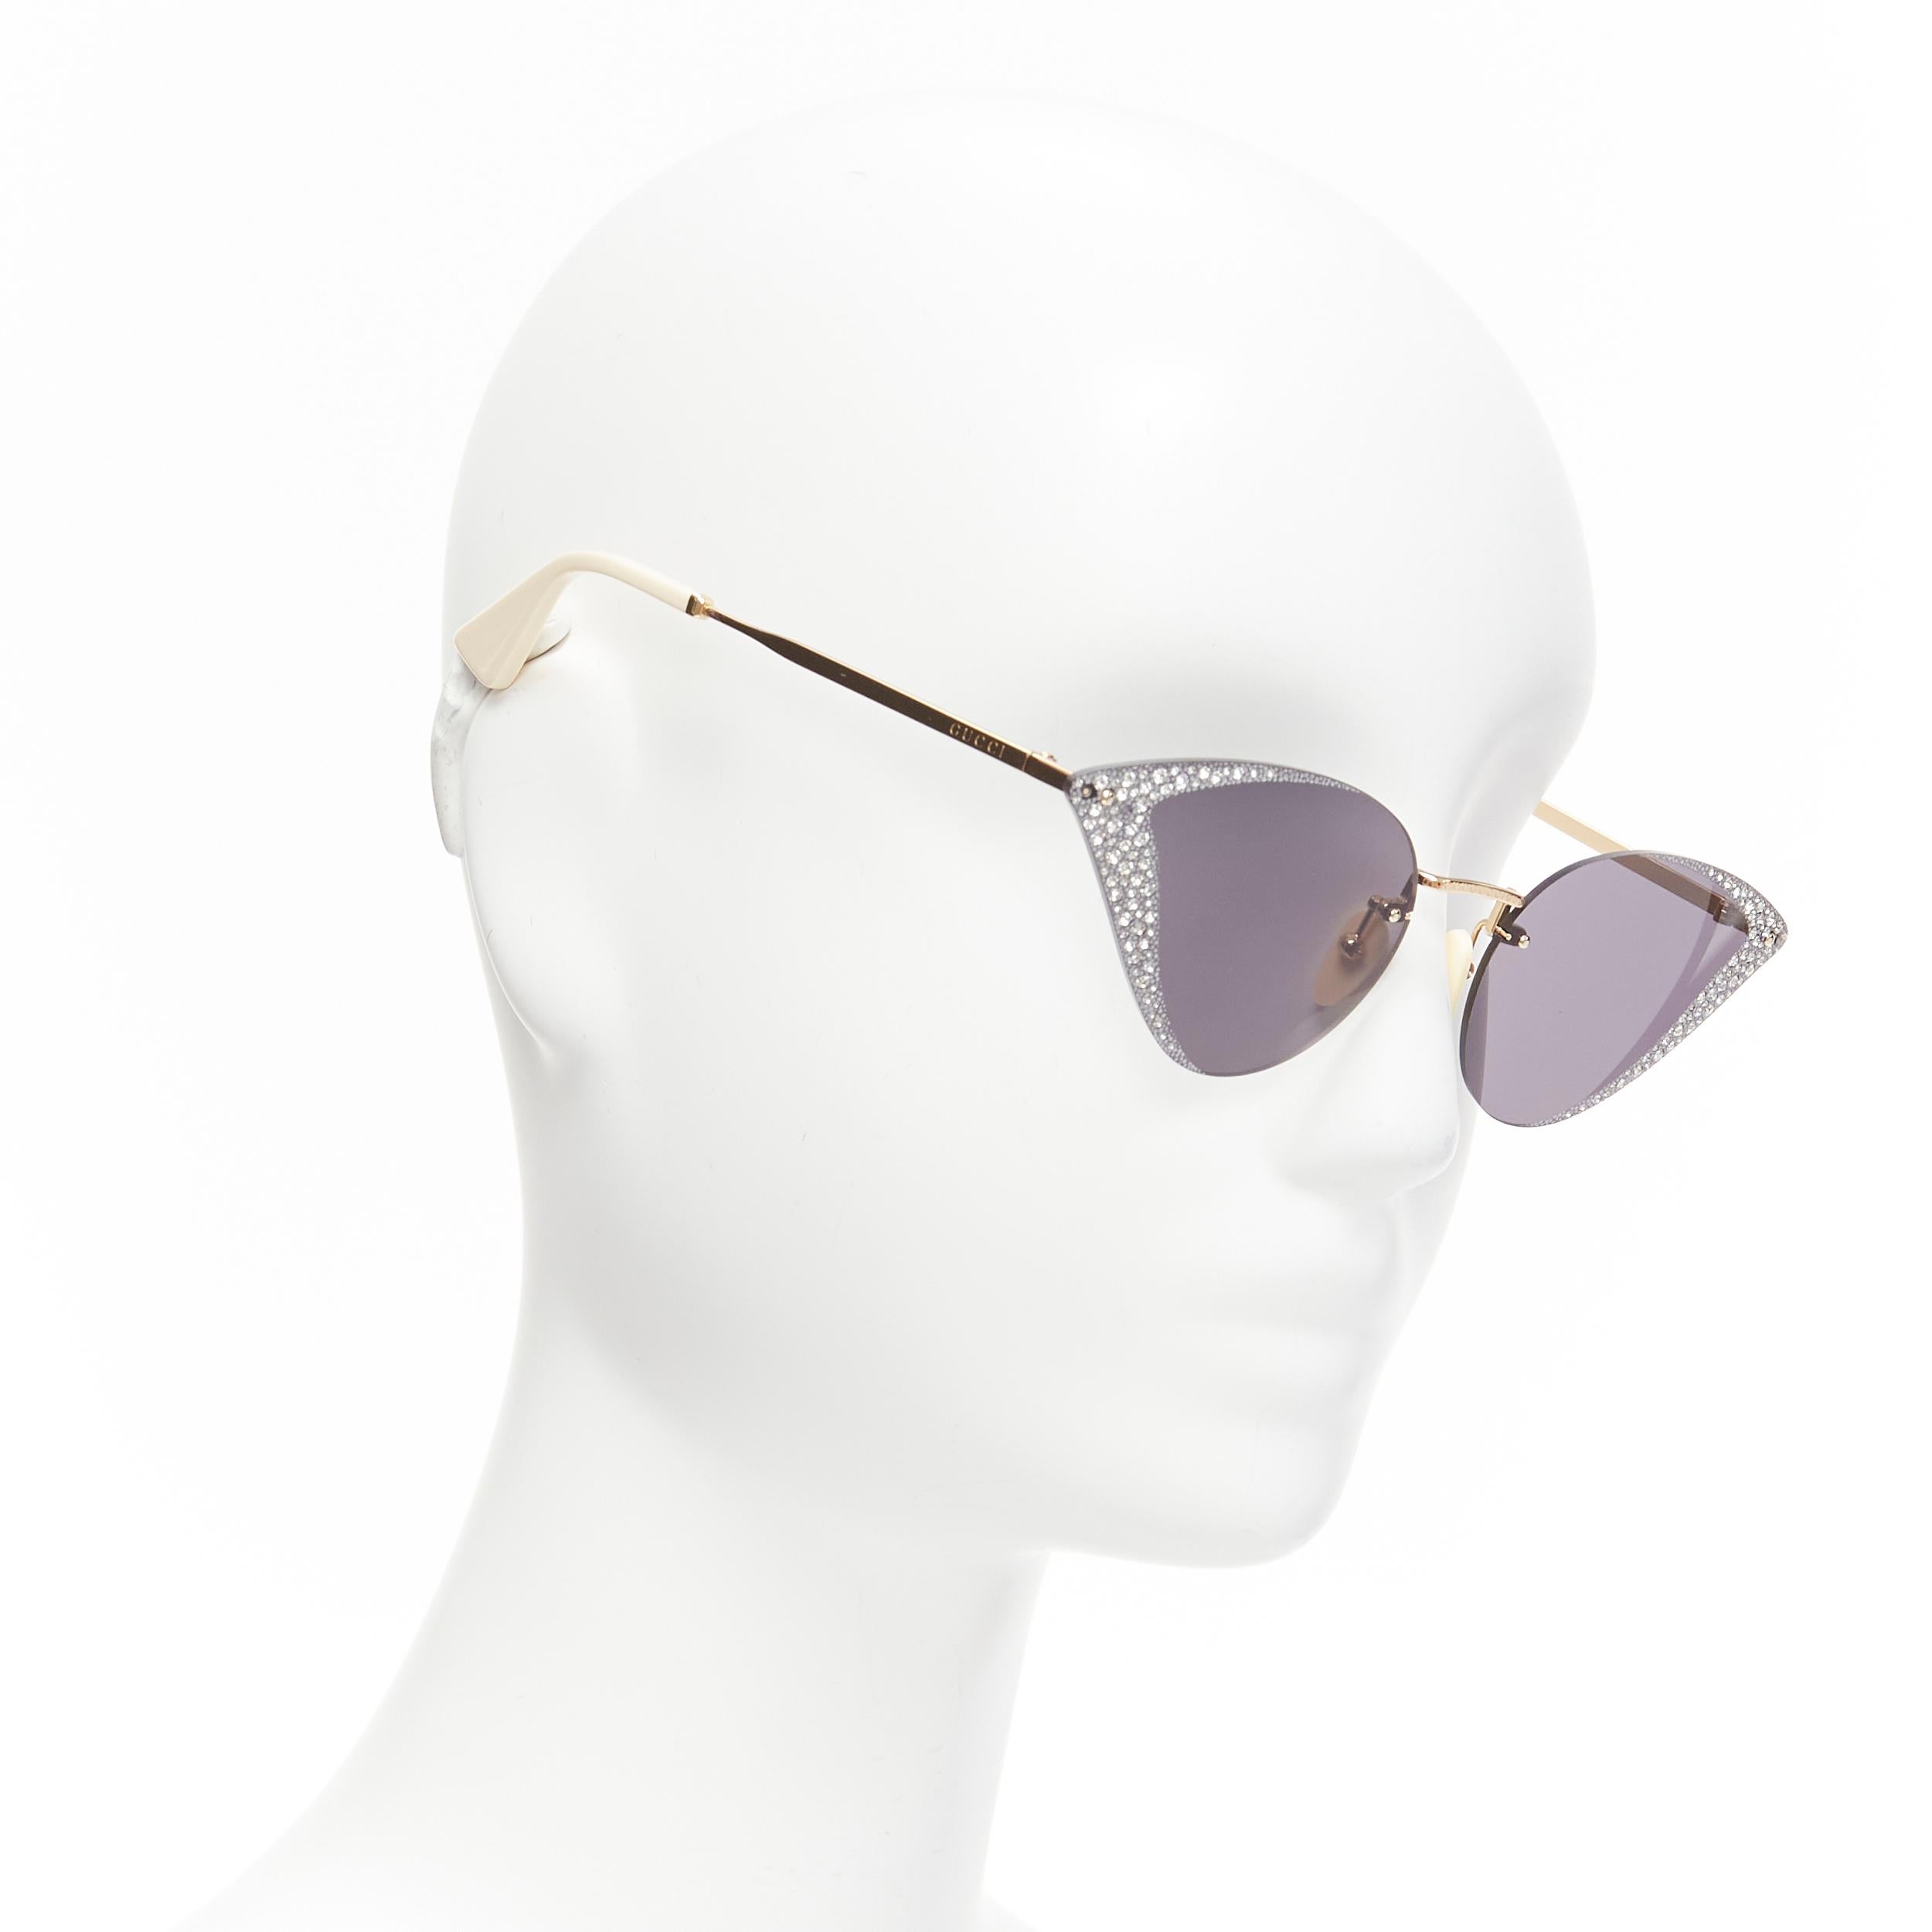 GUCCI Hollywood Forever GG0898S silver crystal black cat eye sunglasses
Reference: TGAS/D01043
Brand: Gucci
Designer: Alessandro Michele
Model: GG0898S
Collection: Hollywood Forever
Material: Metal
Color: Gold, Silver
Pattern: Crystals
Lining: Gold